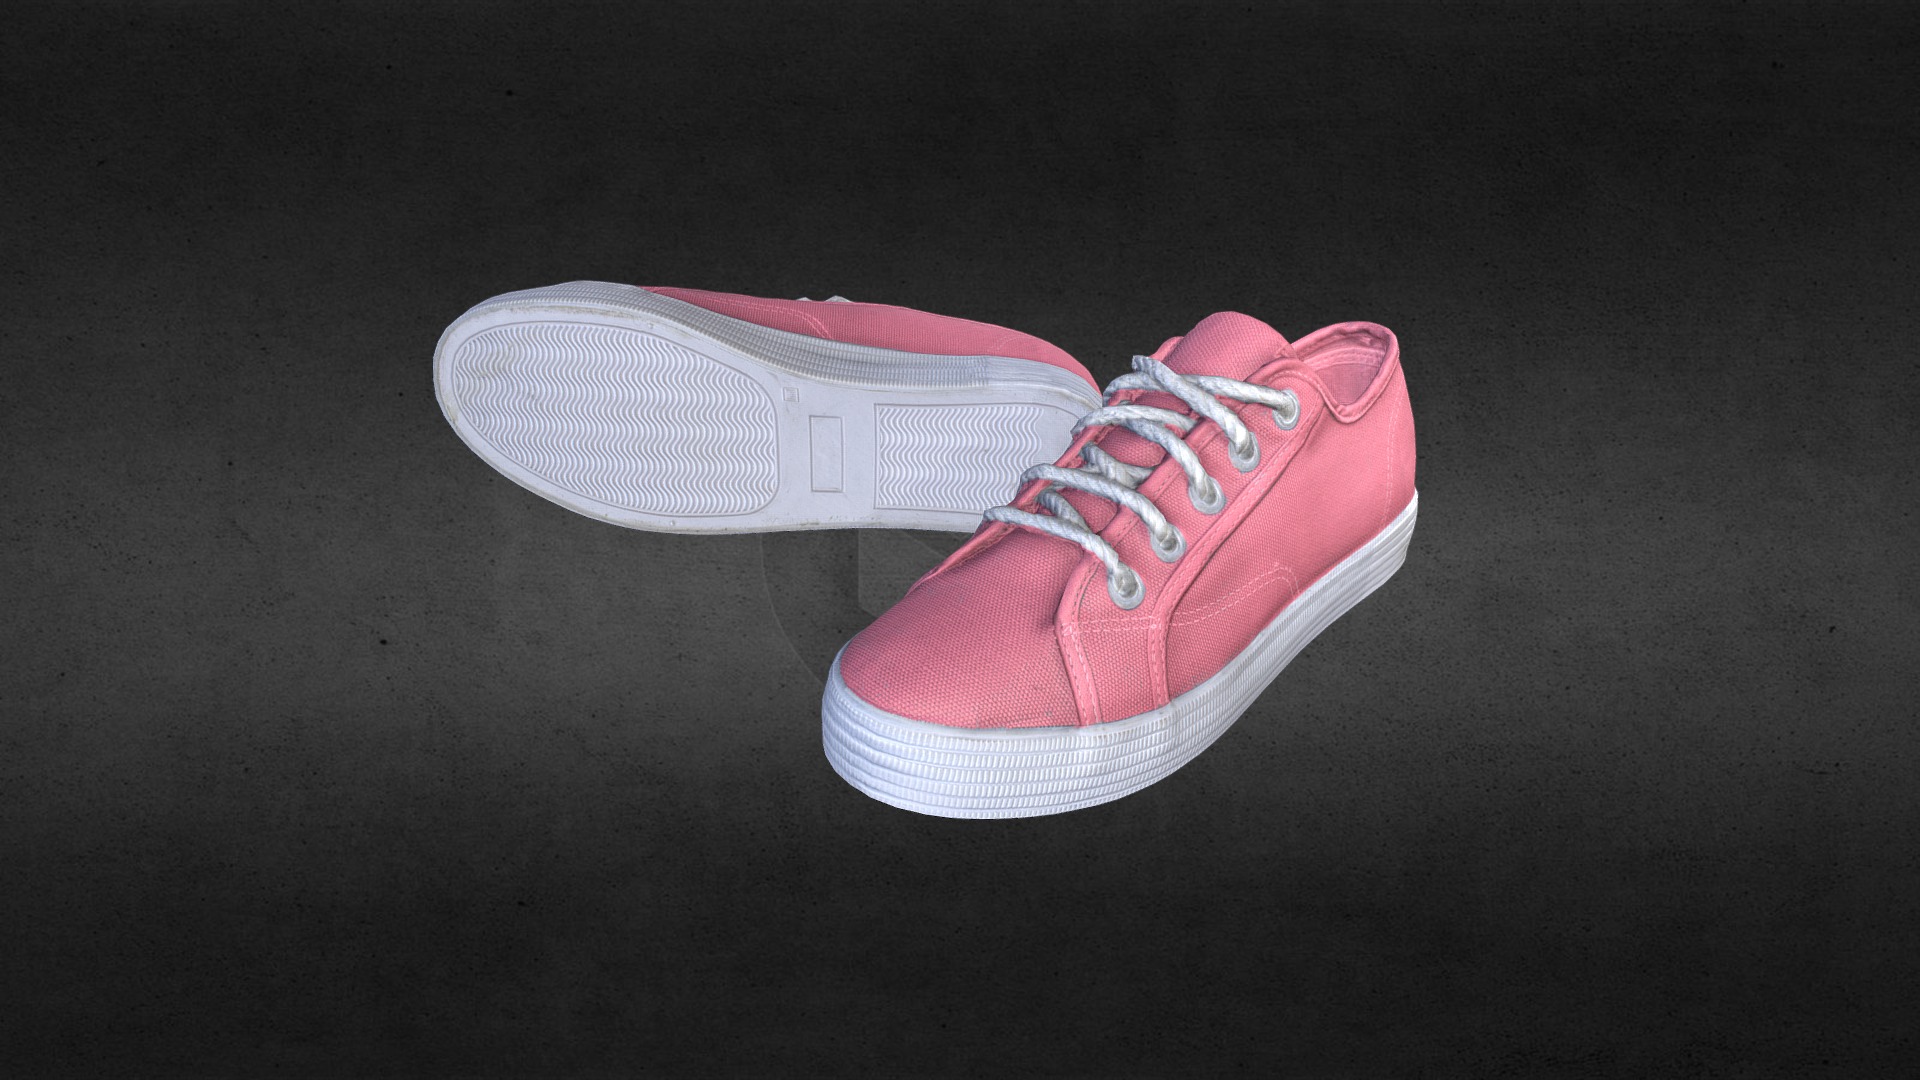 3D model Casual summer shoes low poly - This is a 3D model of the Casual summer shoes low poly. The 3D model is about a pair of pink and white shoes.